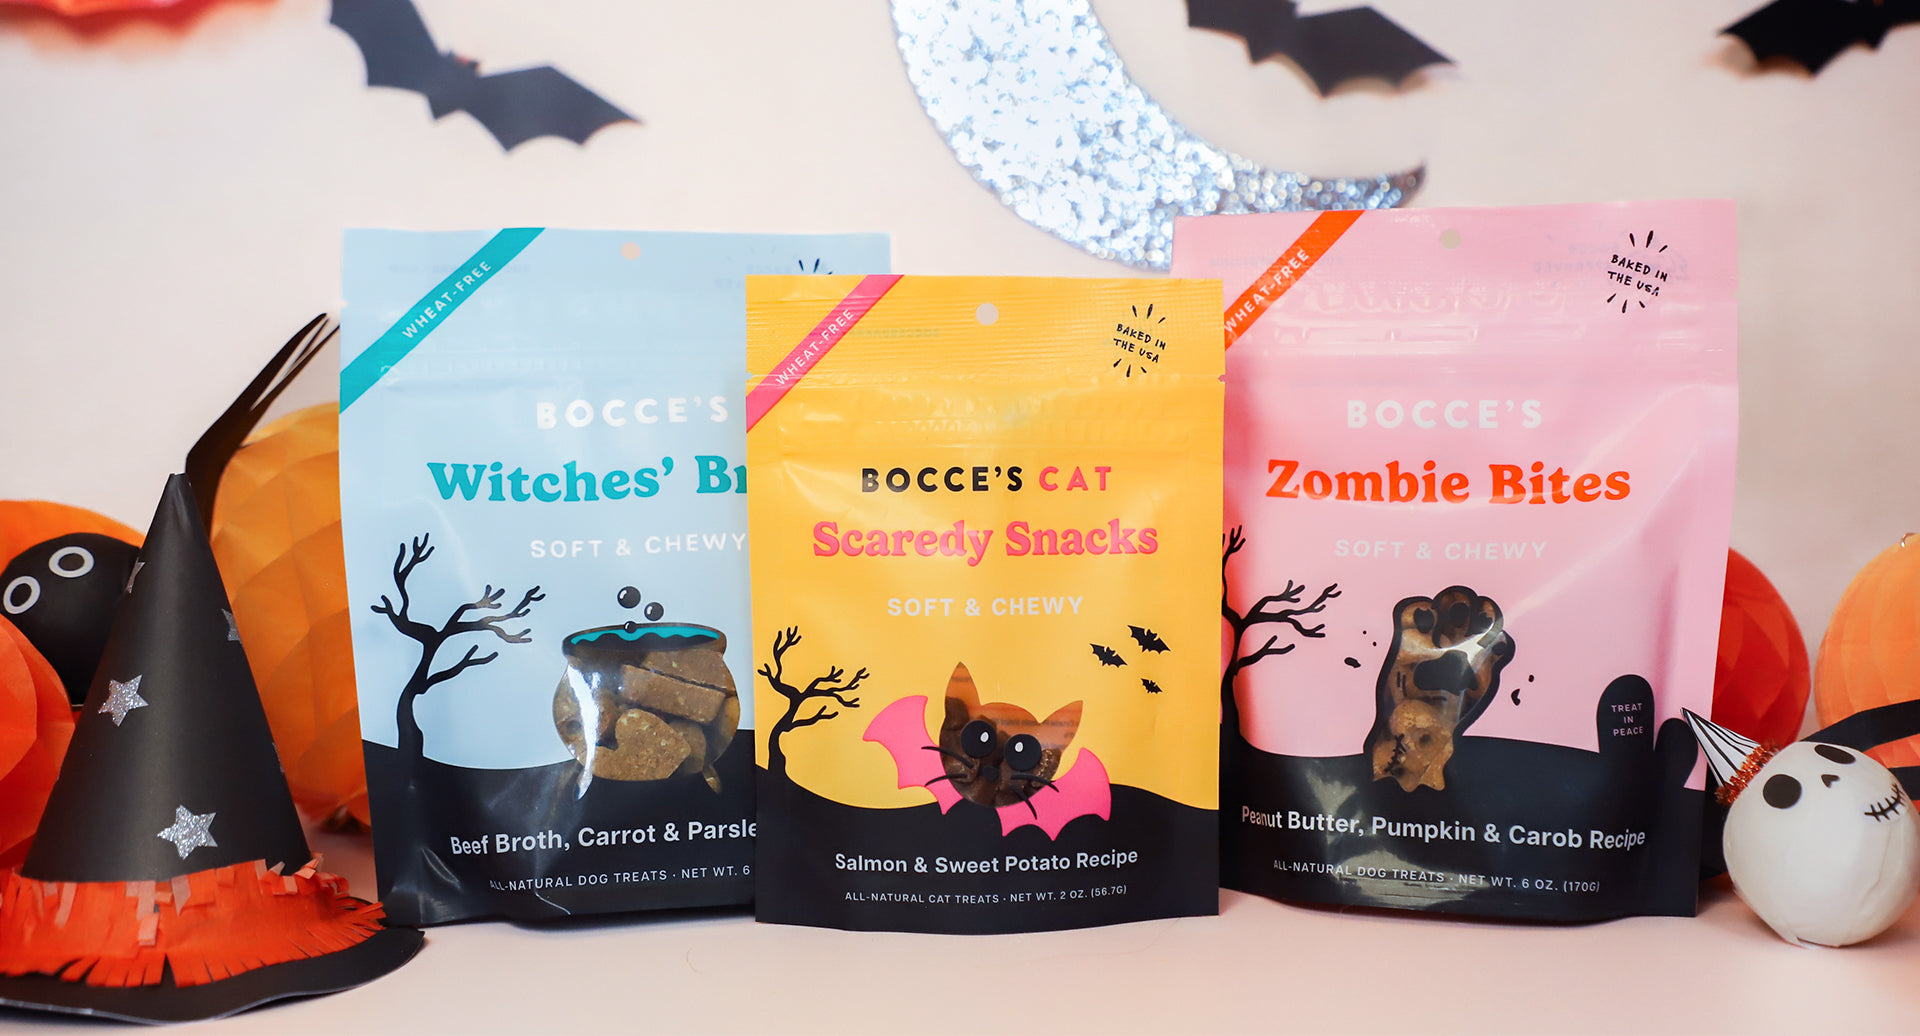 BOO! We baked up spooky new treats just for you.